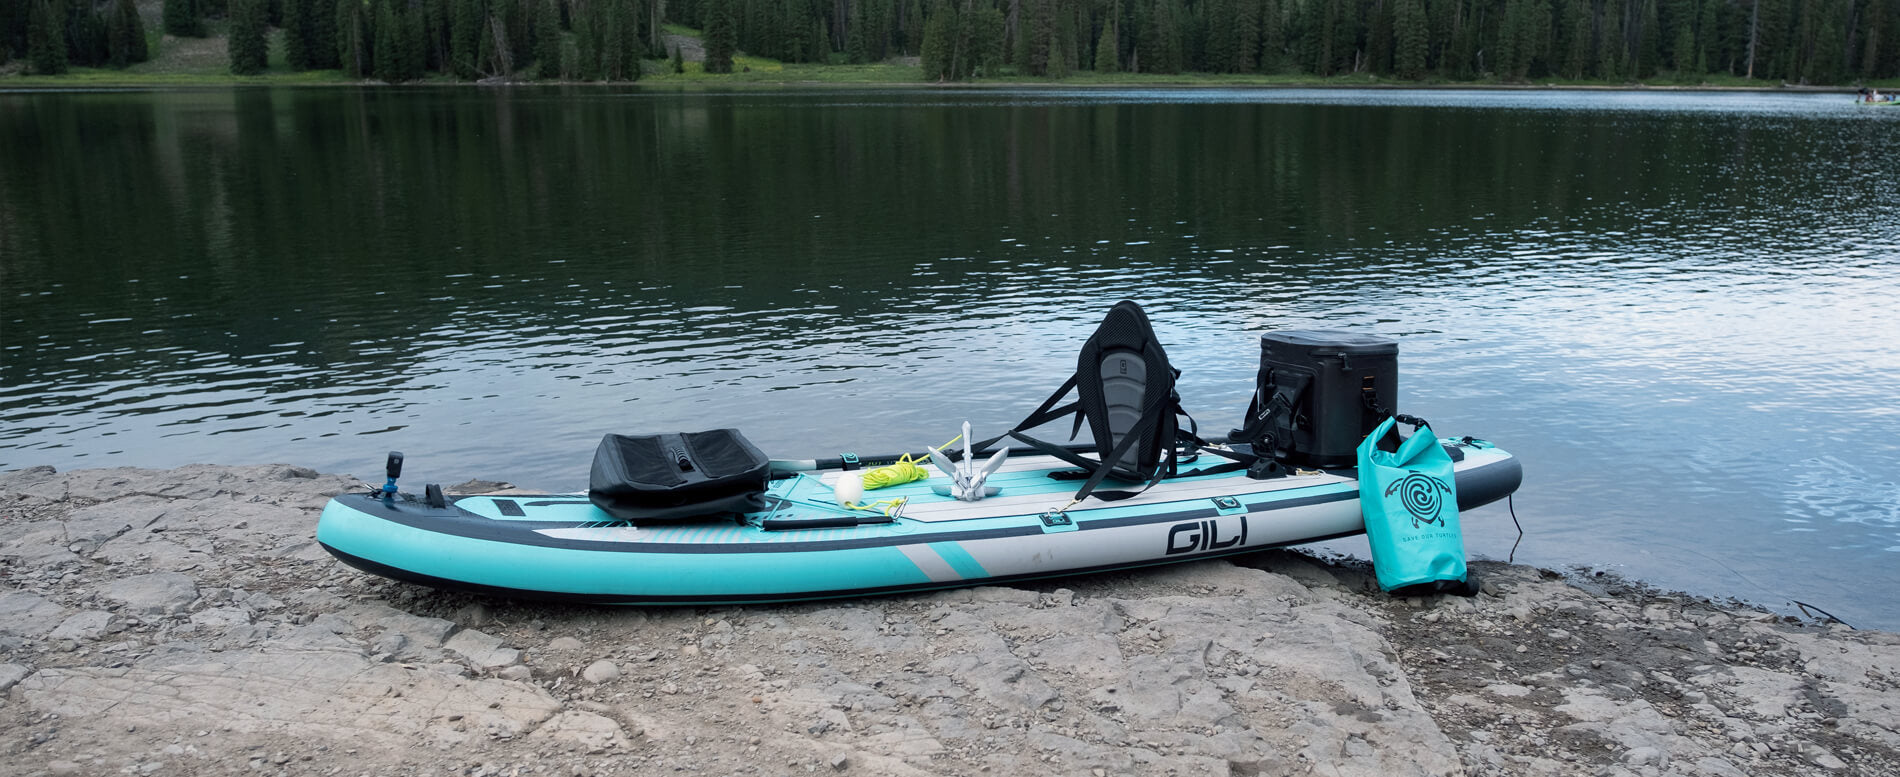 The 32 Best Paddle Board Accessories You Must Have for 2022 - GILI Sports